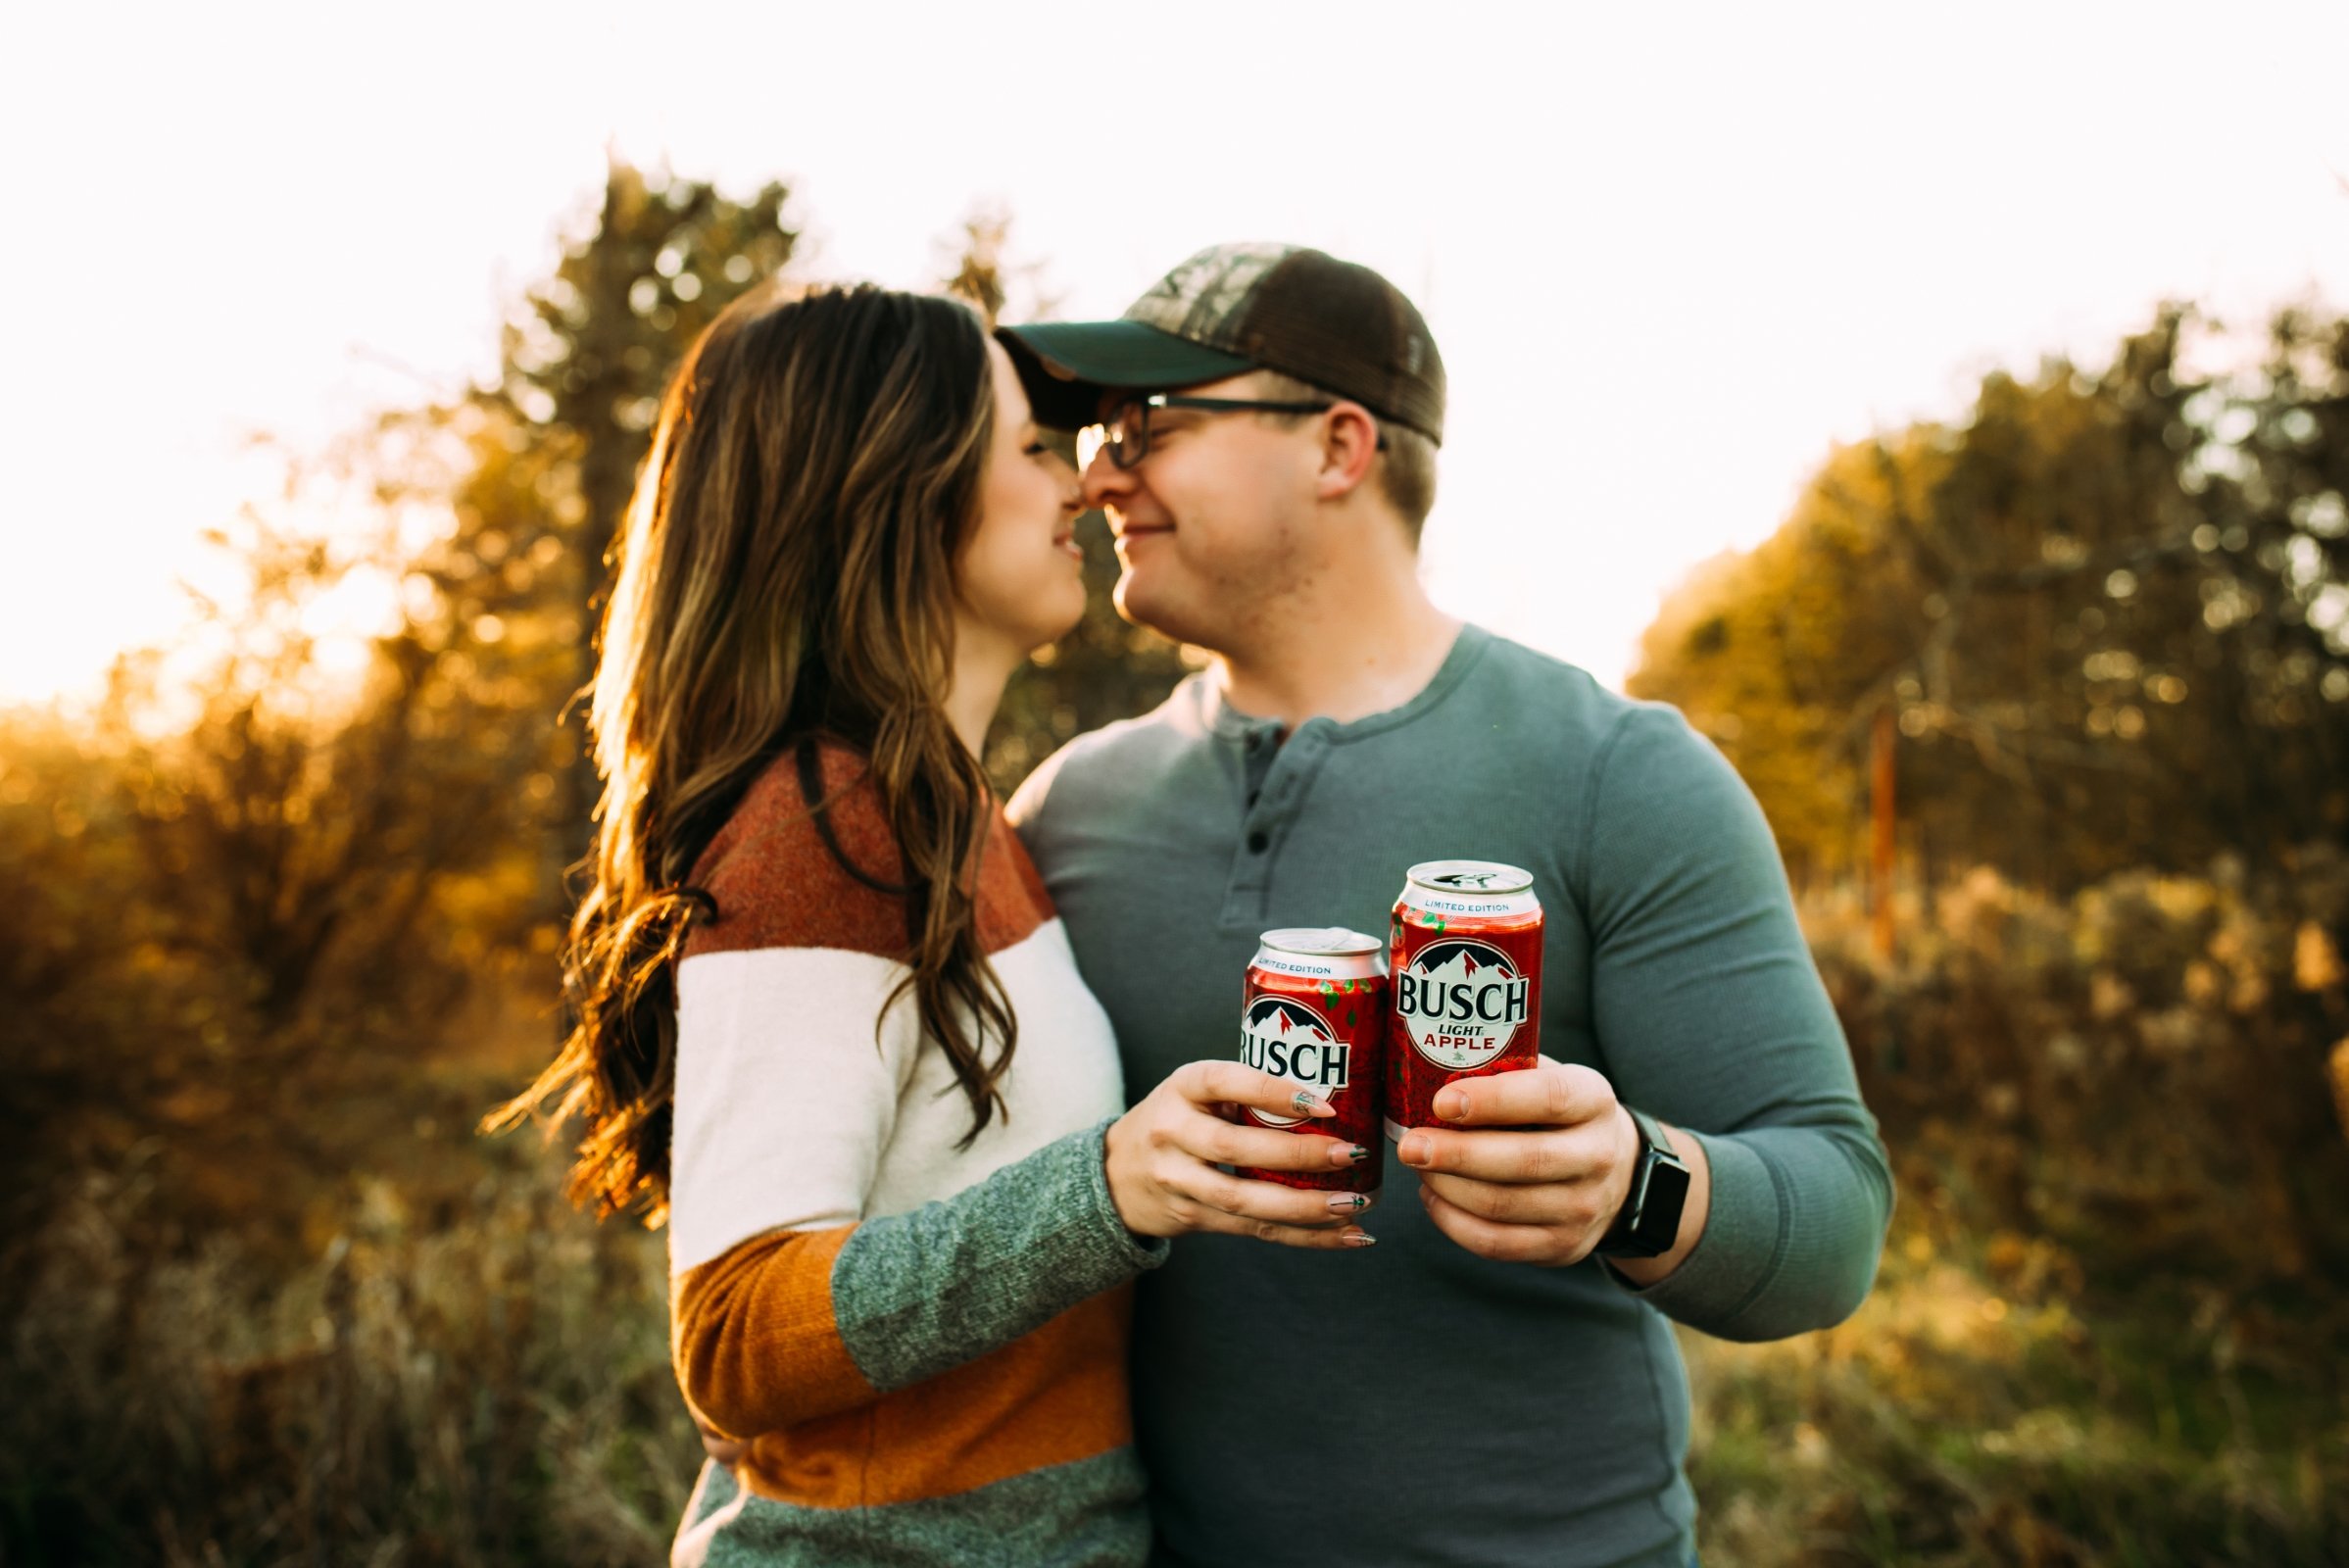 wisconsin engagement photographer, what to wear engagement photos